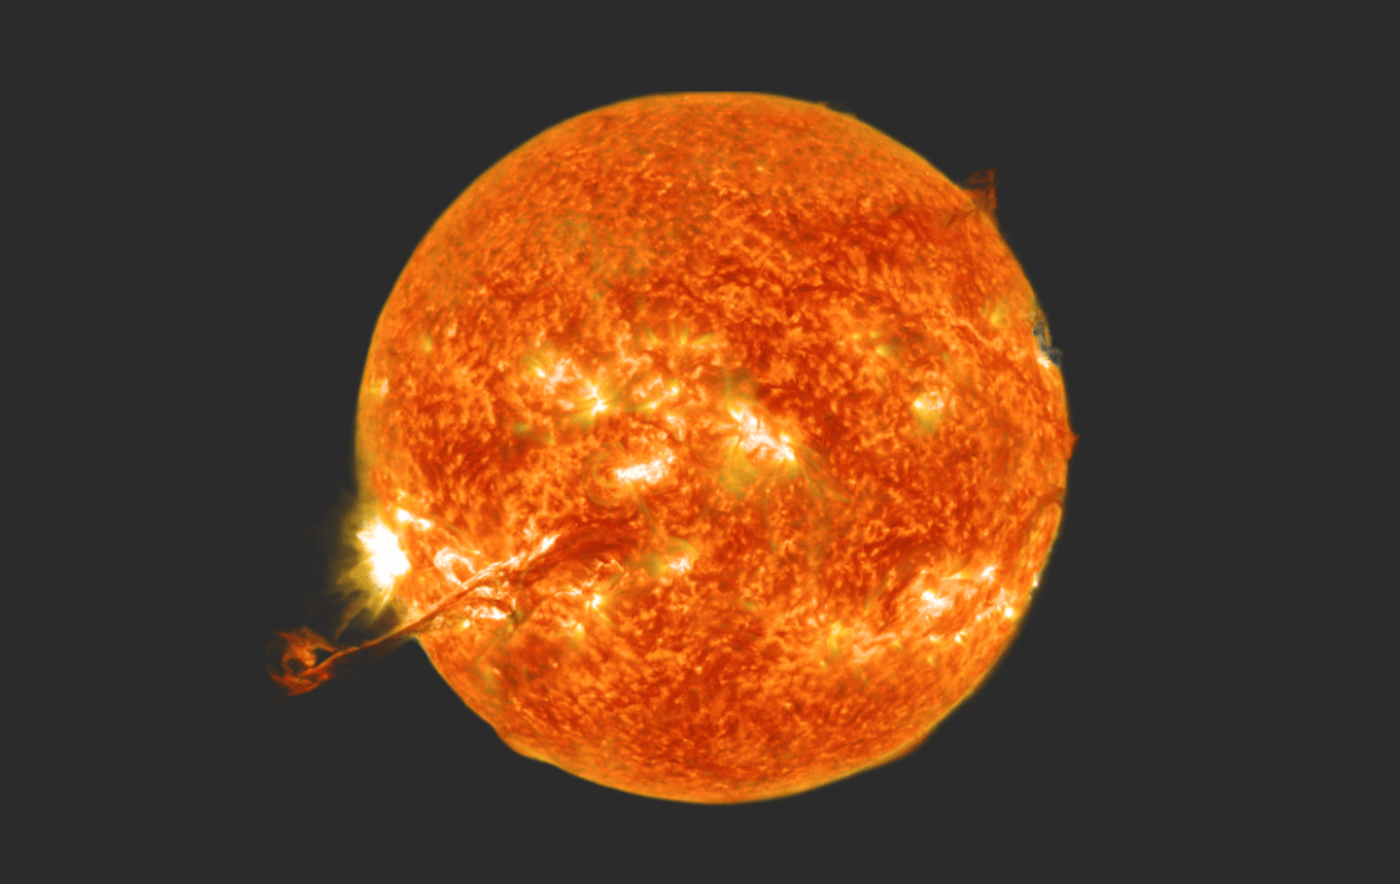 New research places the sun's magnetic field close to the surface, upending decades of theories